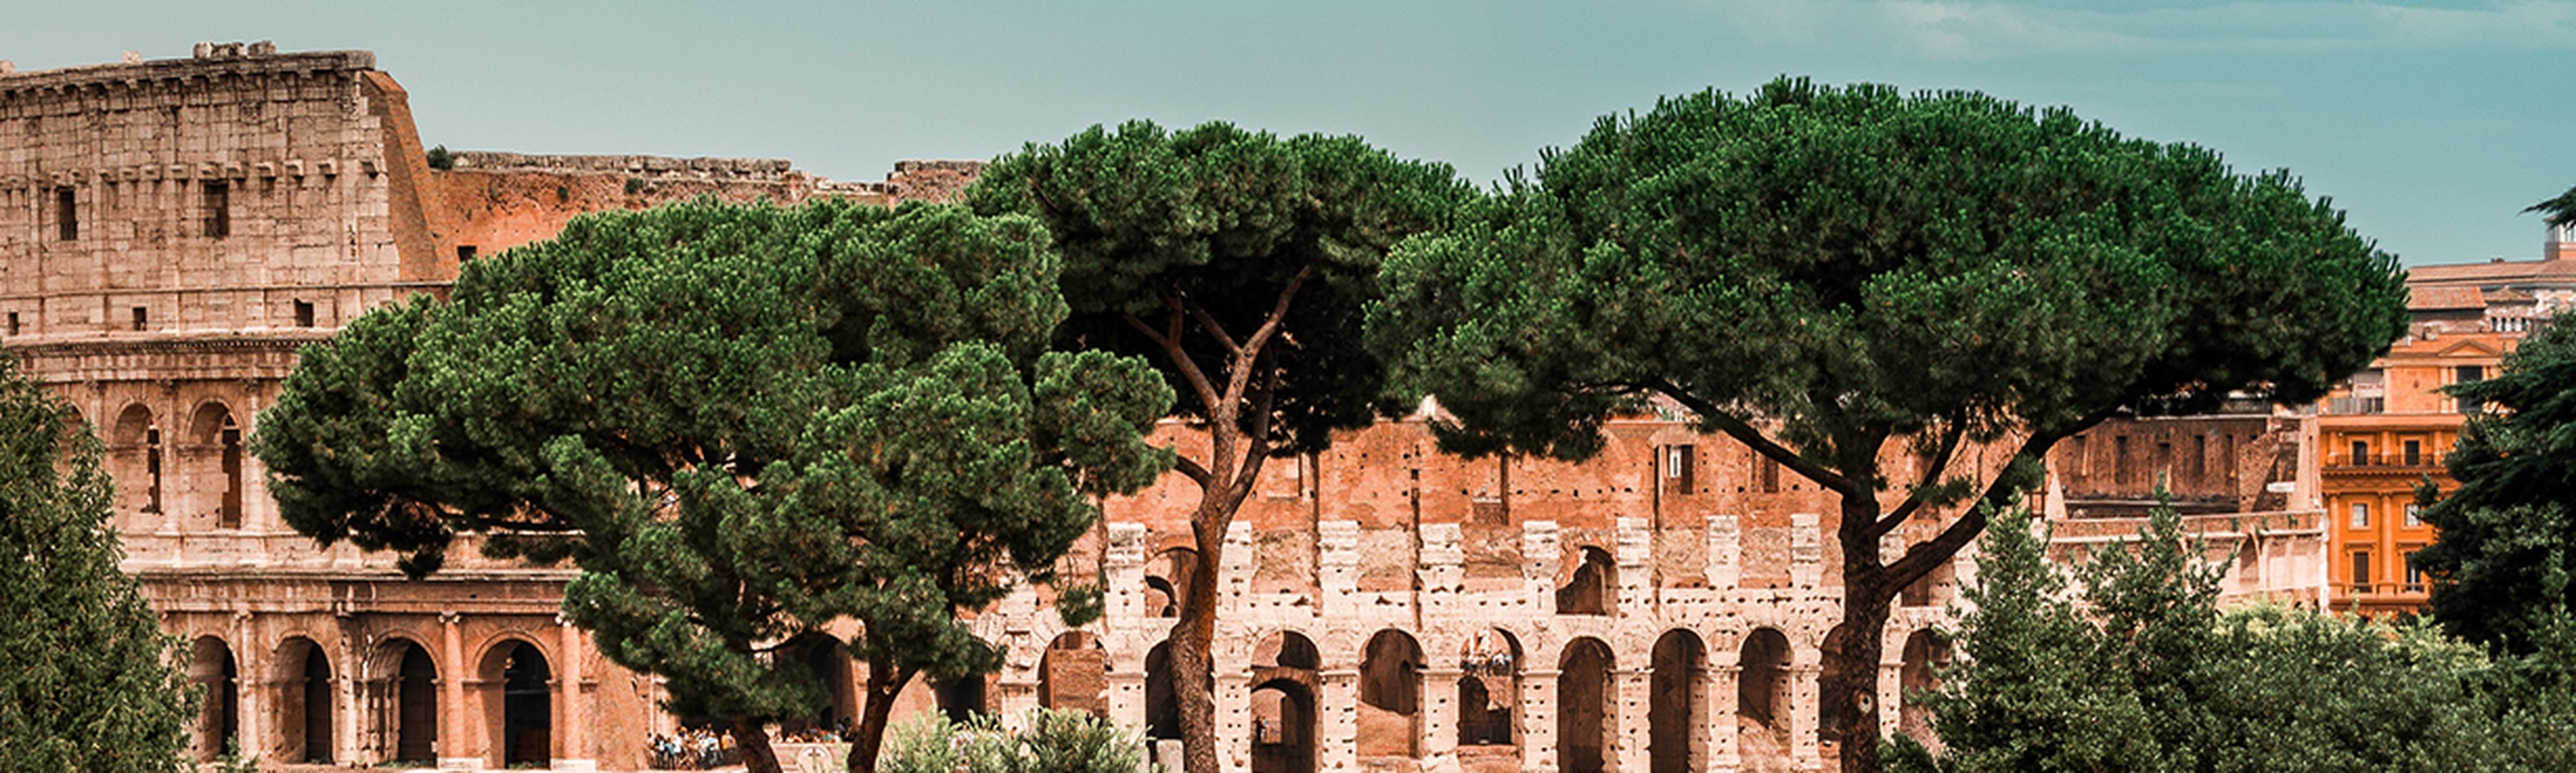 Colosseum with trees in Rome, Italy